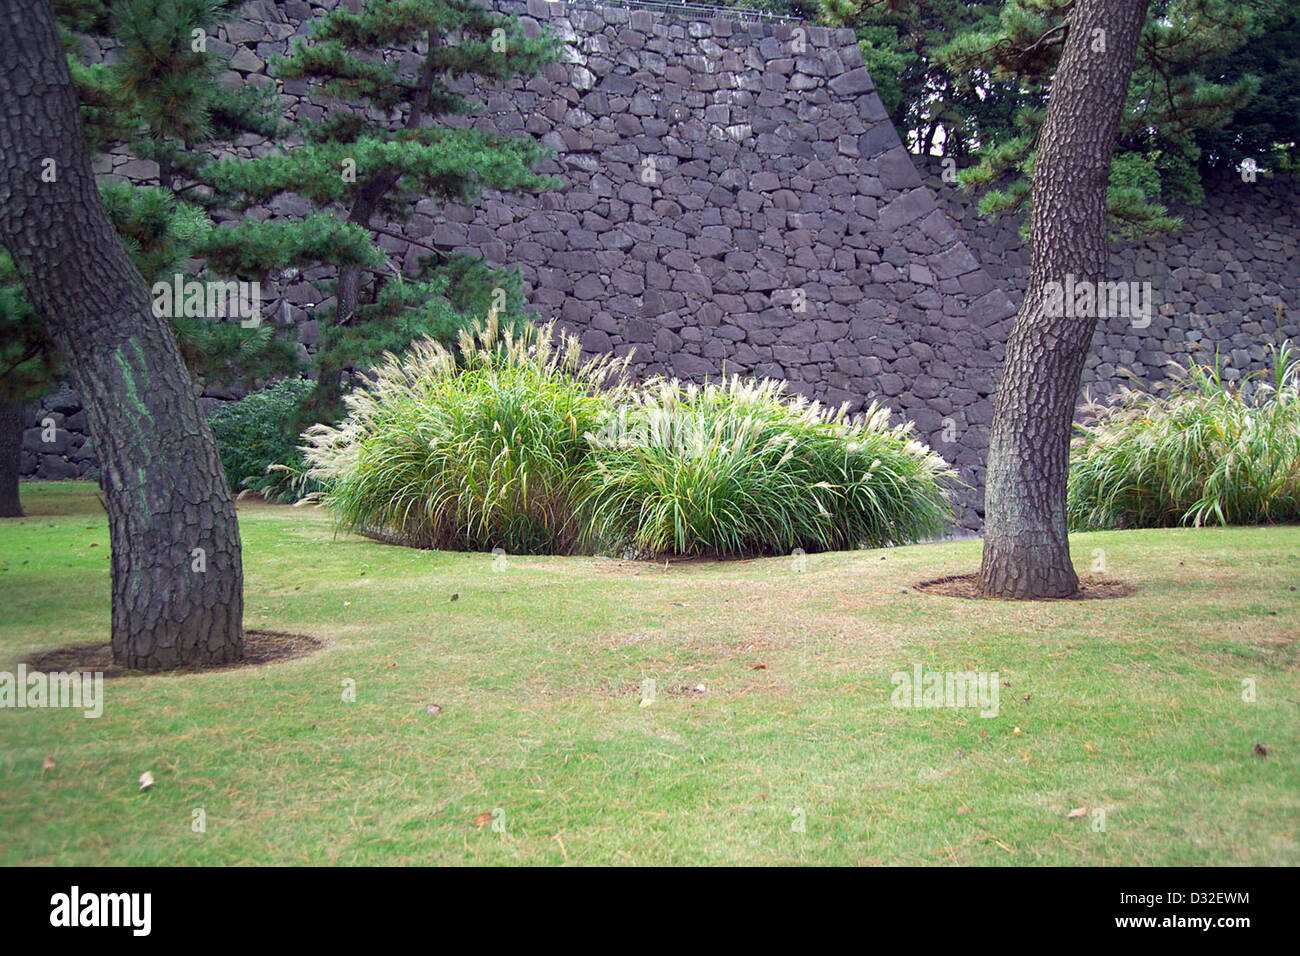 Kokyo (Imperial Palace, formerly Edo Castle) in Tokyo, Japan. Stock Photo